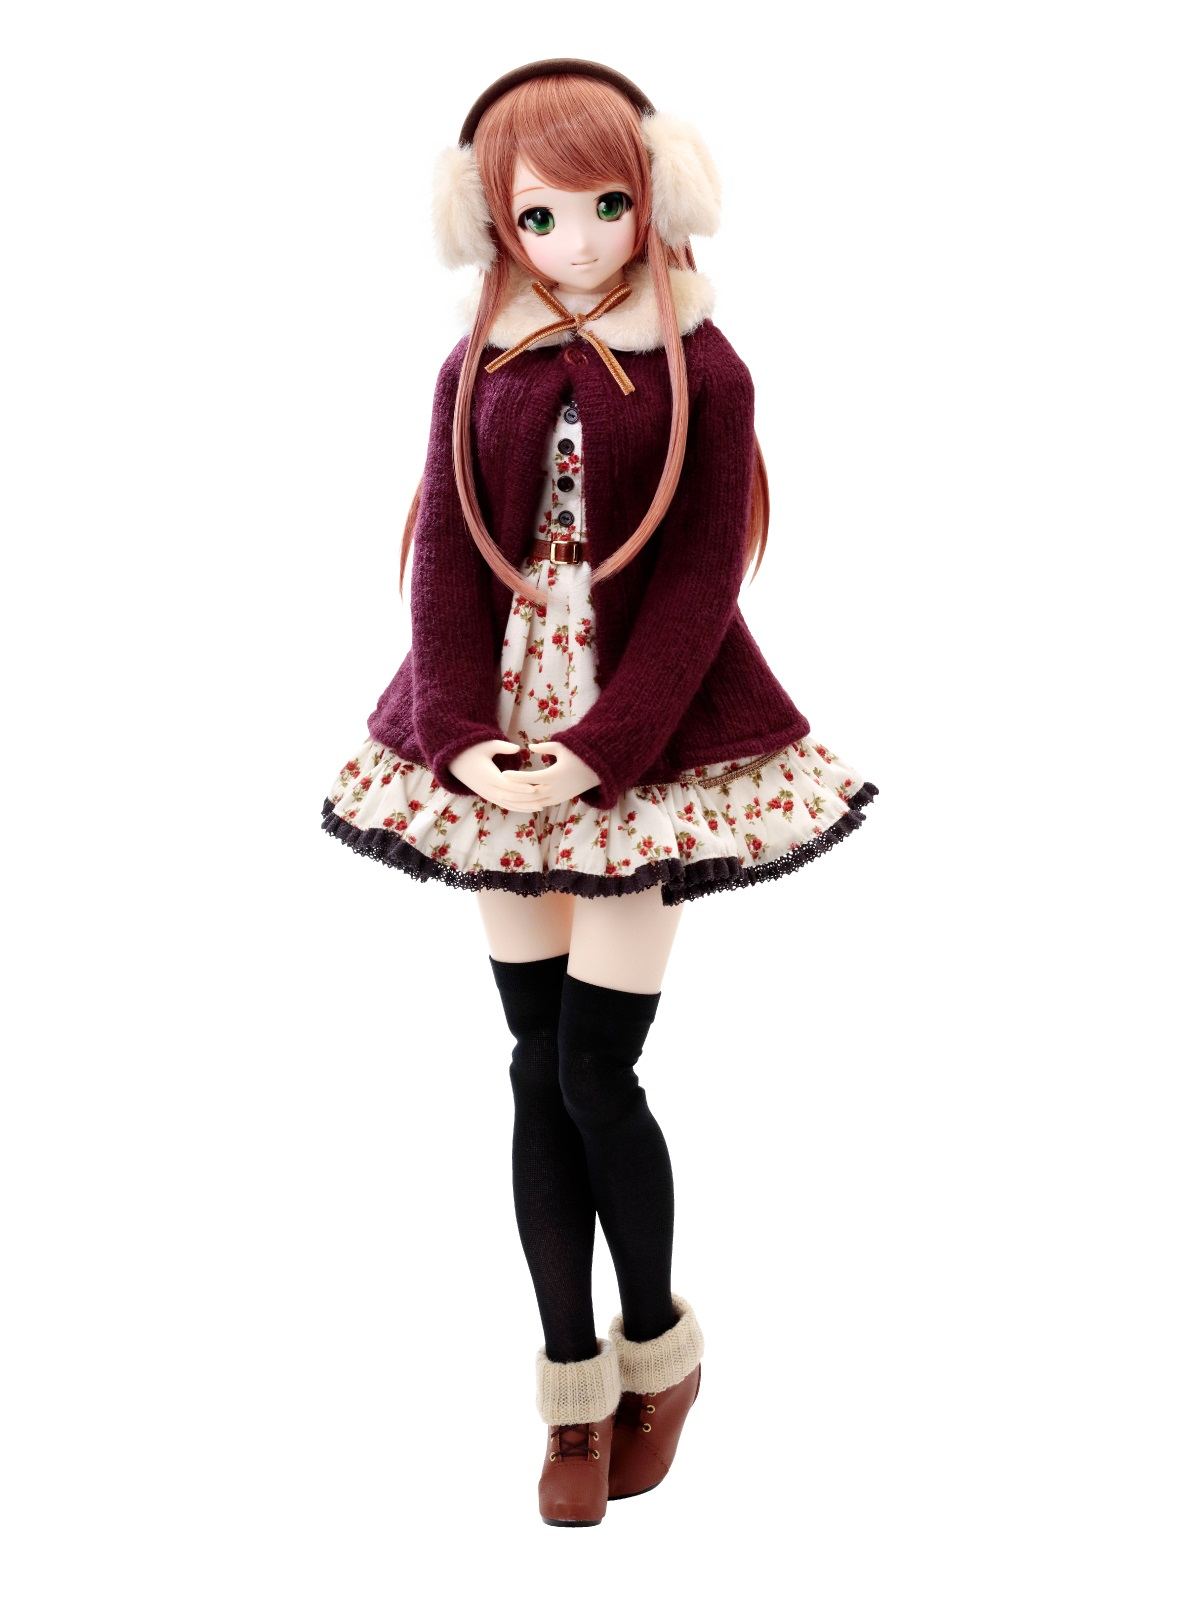 IRIS COLLECT SERIES 1/3 SCALE FASHION DOLL: NOIX / MERRY SNOW Azone